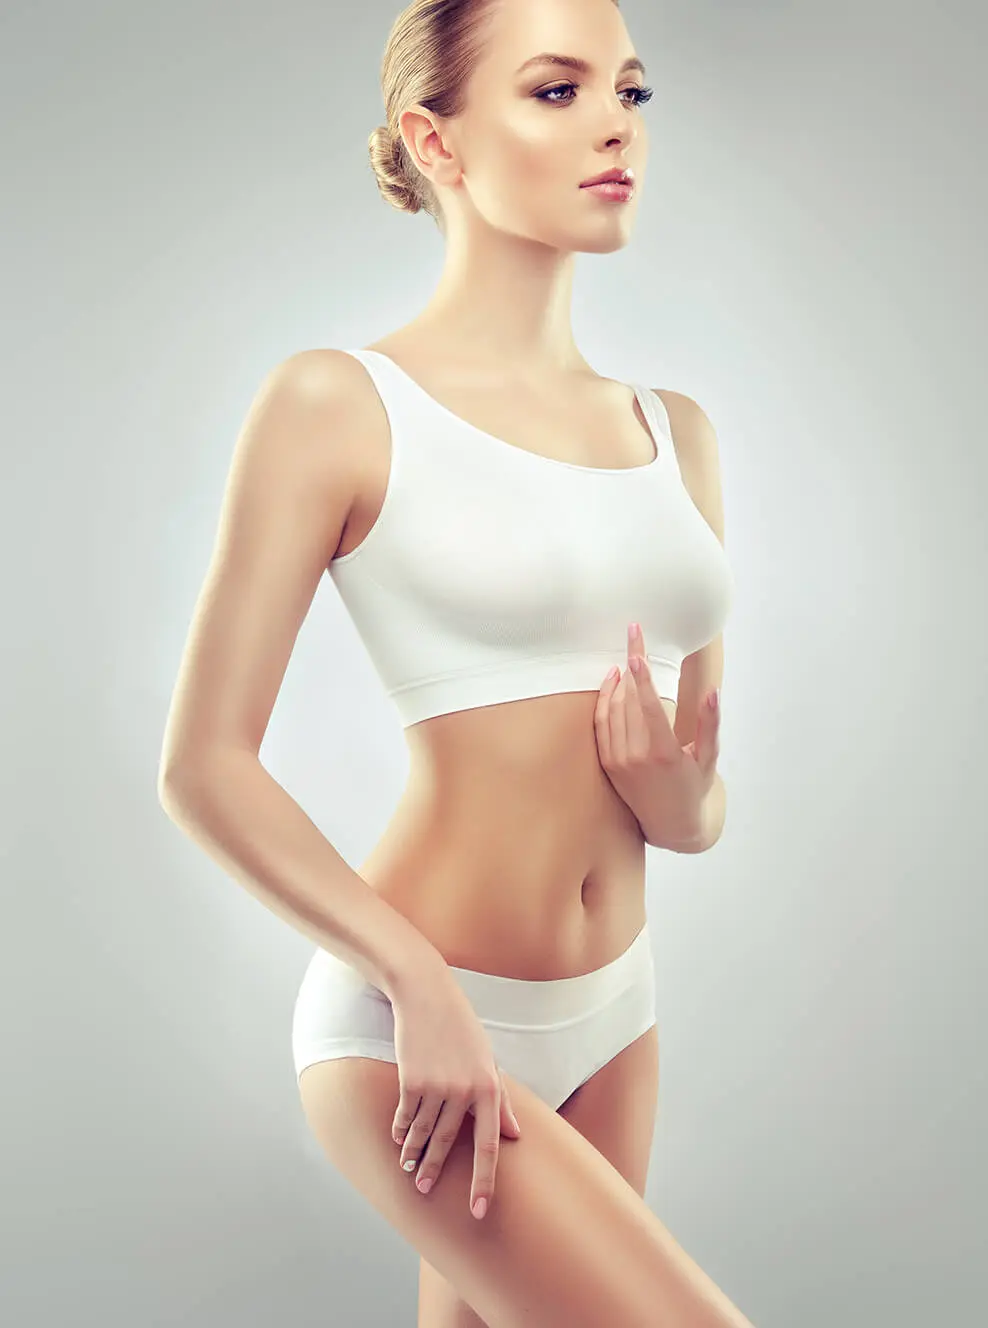 A woman in white underwear holding her hand up to the side.